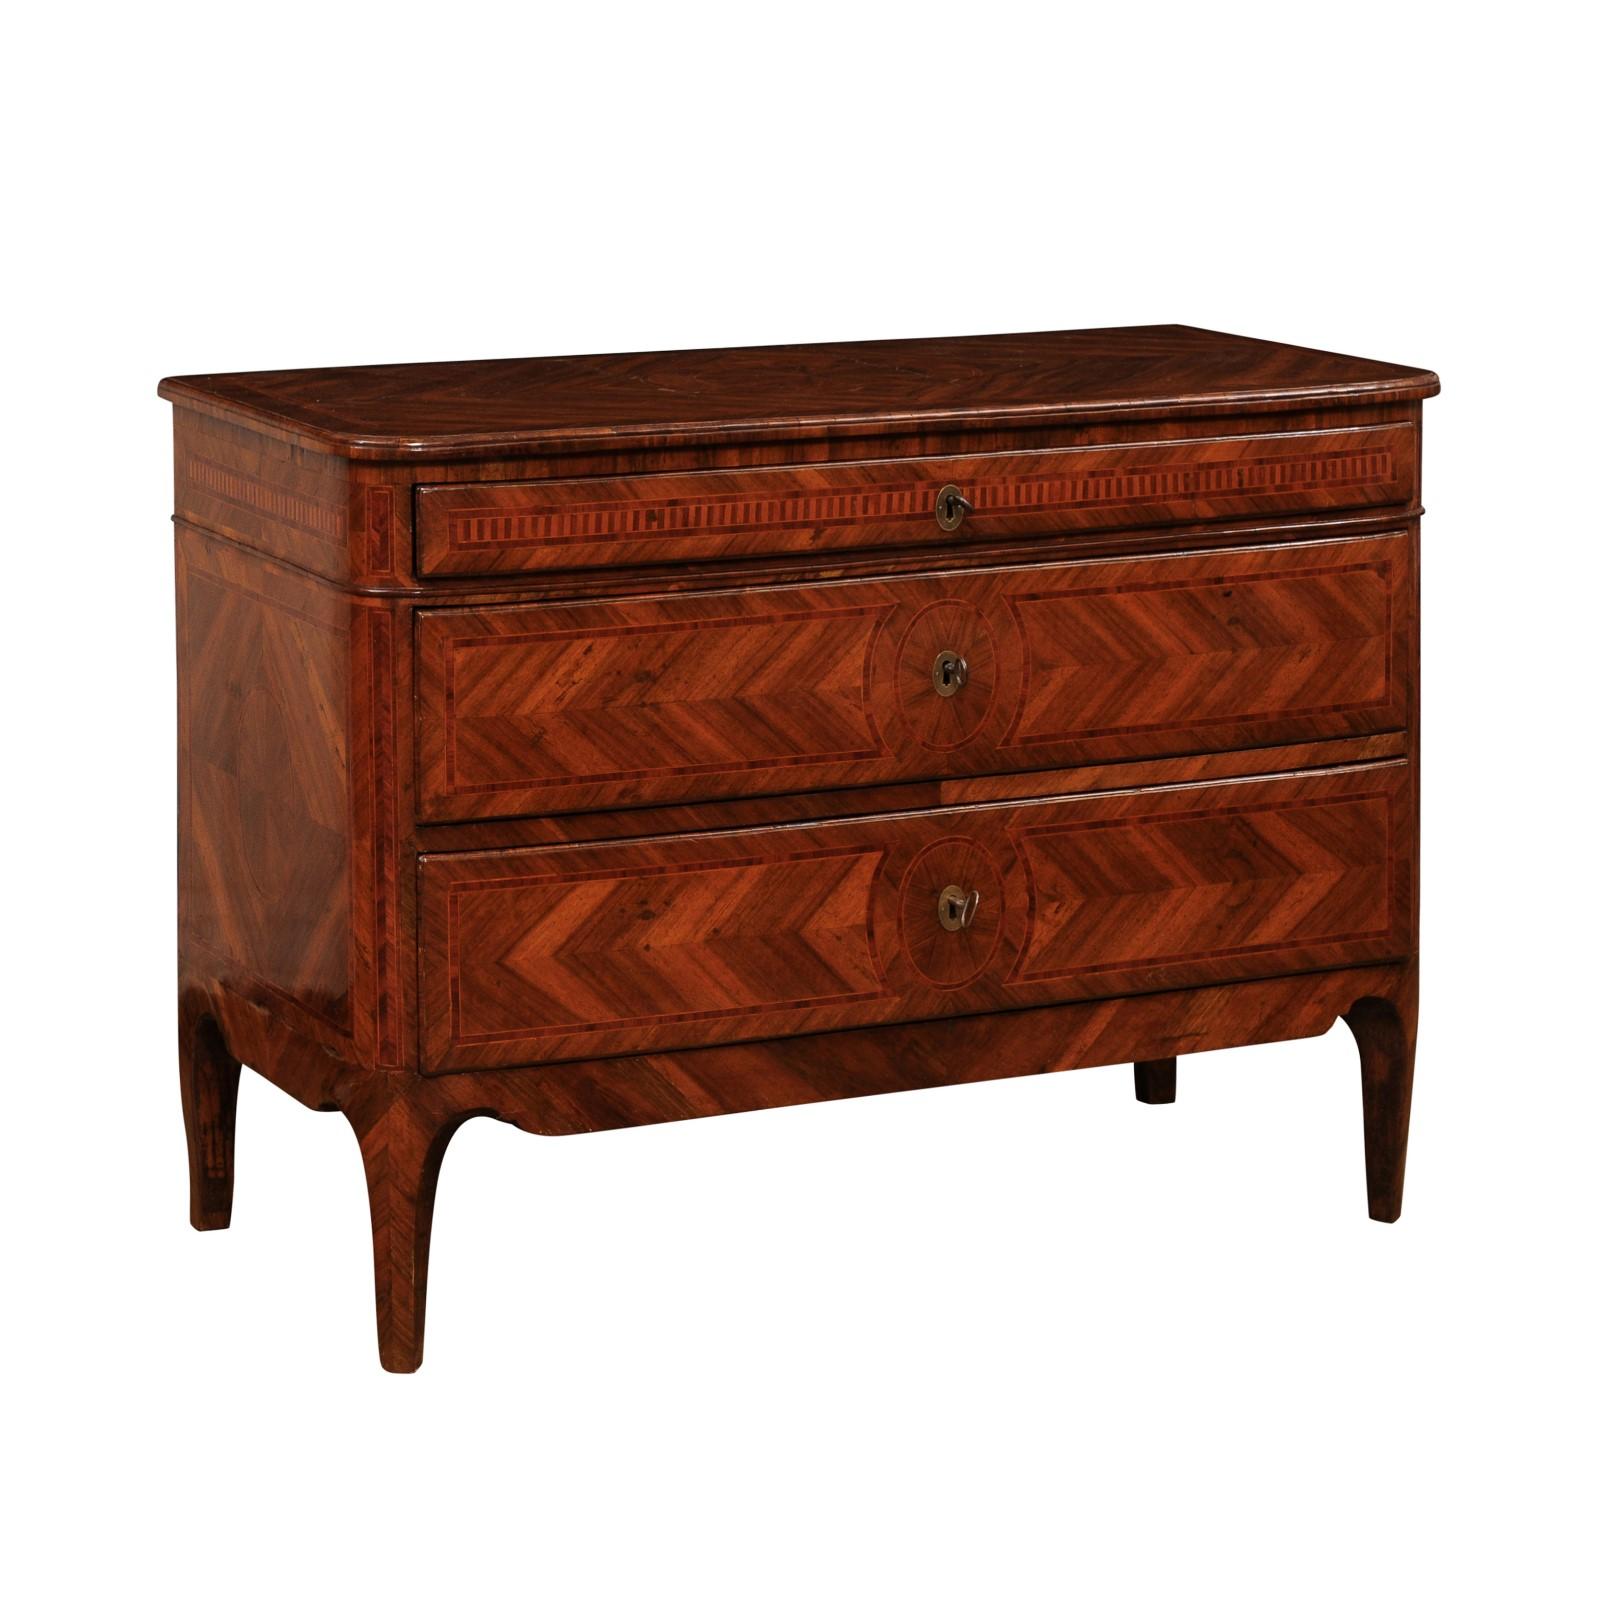 An Italian walnut, mahogany and cherry commode from the 18th century with three drawers and beautiful marquetry décor. Discover the timeless elegance of this exquisite Italian commode from the 18th century. Crafted from walnut, mahogany, and cherry